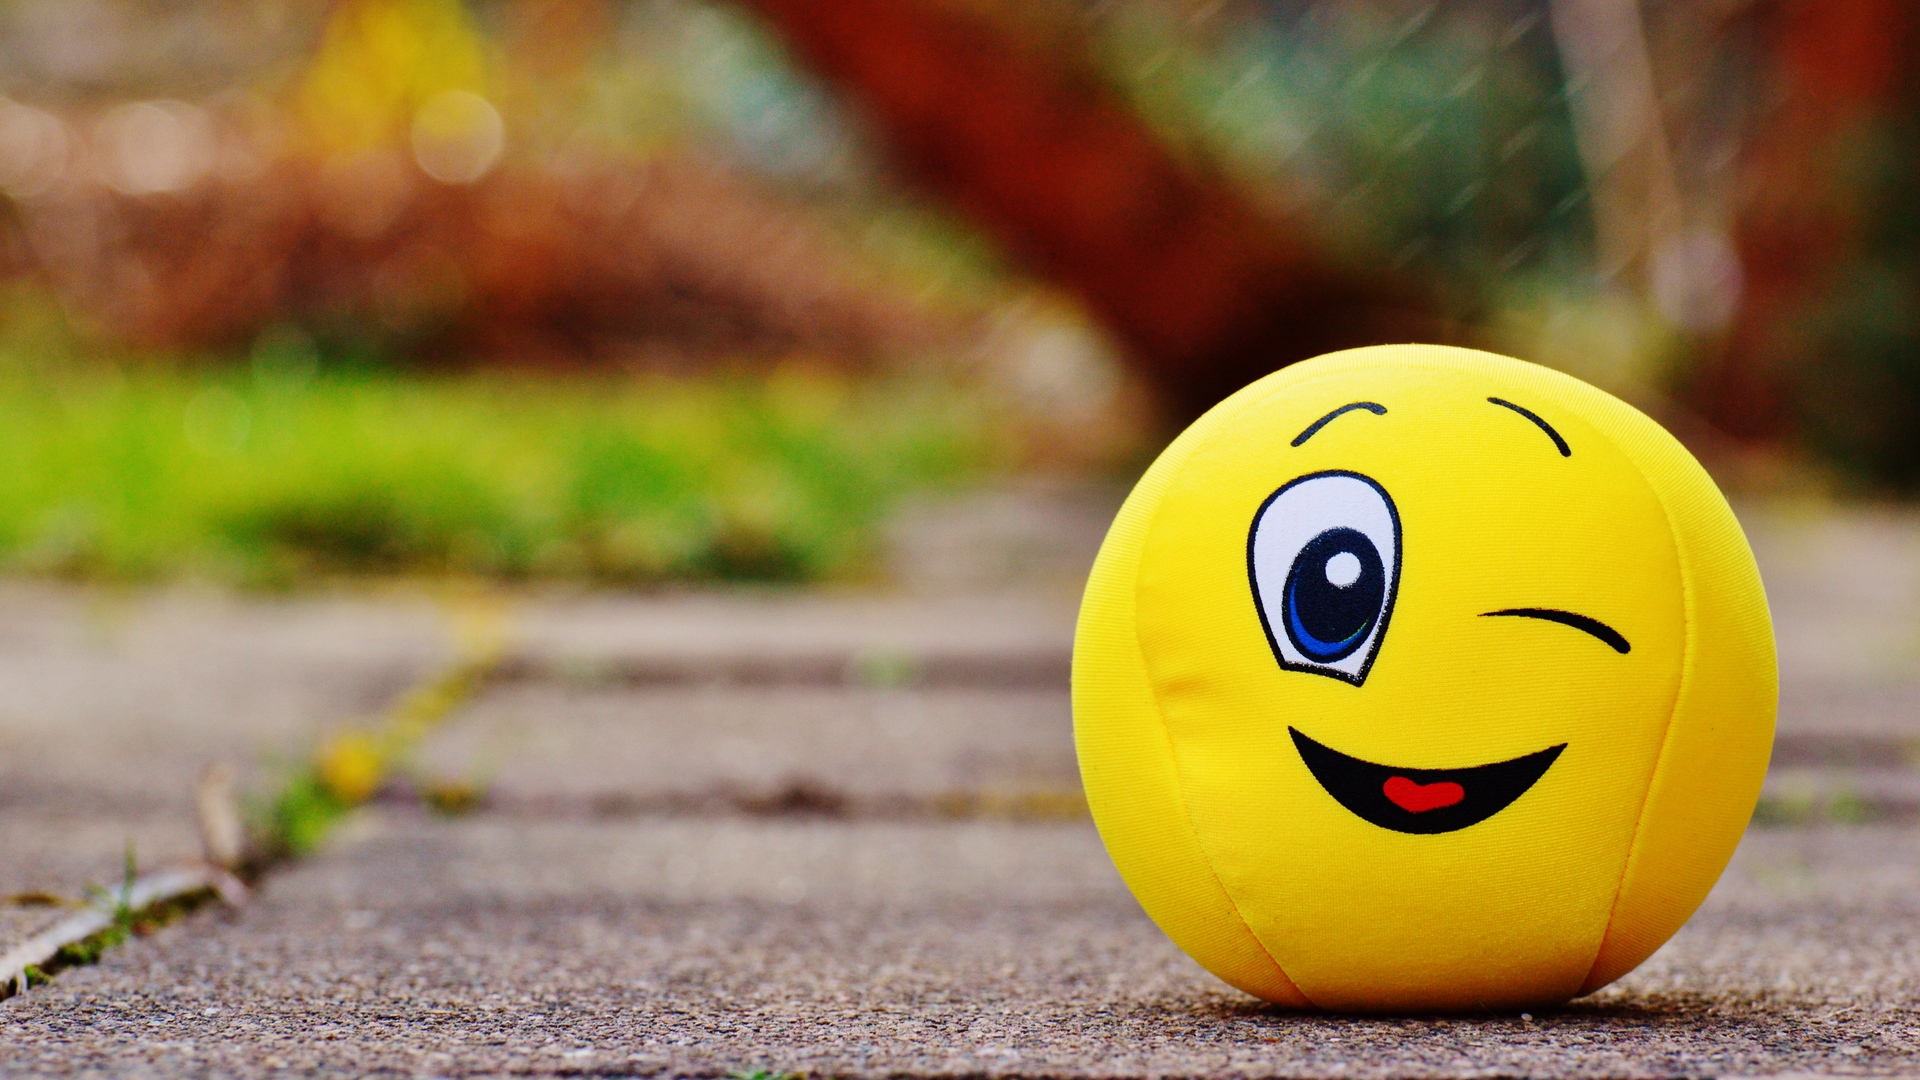 Download wallpaper 1920x1080 ball smile happy toy full hd hdtv